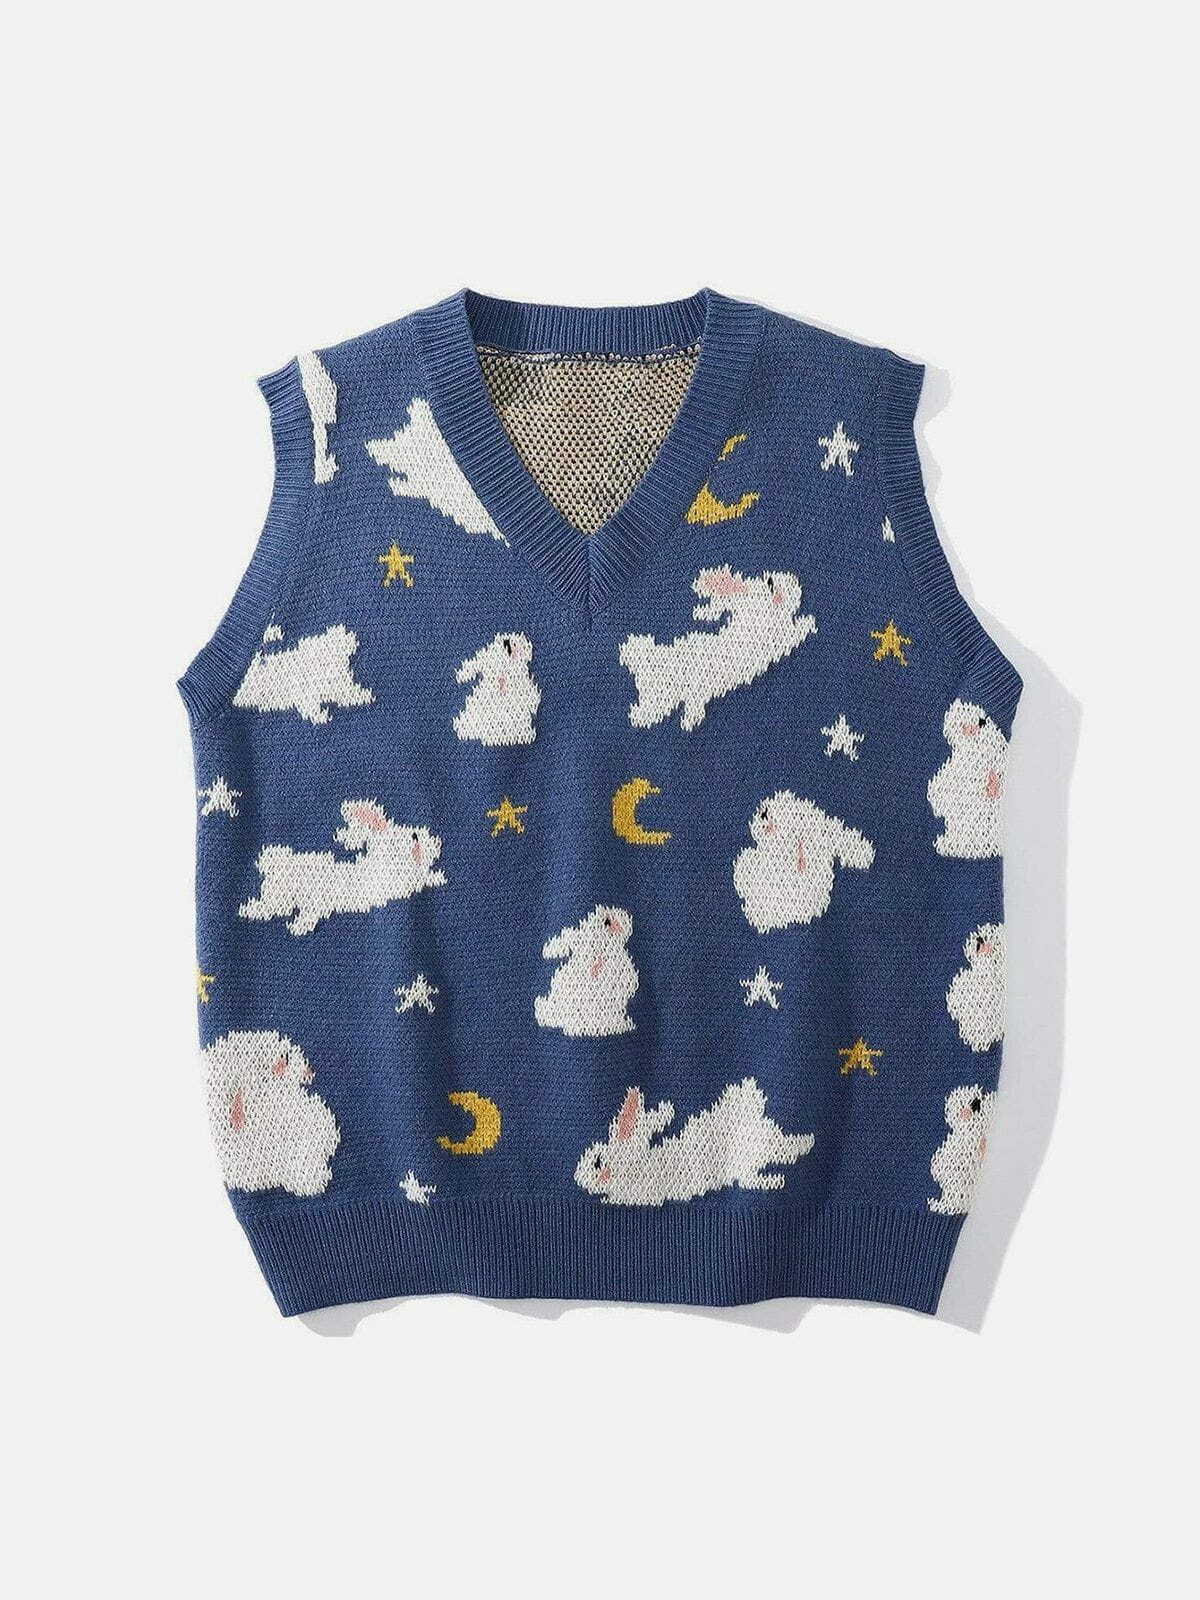 quirky moon rabbit sweater vest   y2k fashion revival 1784